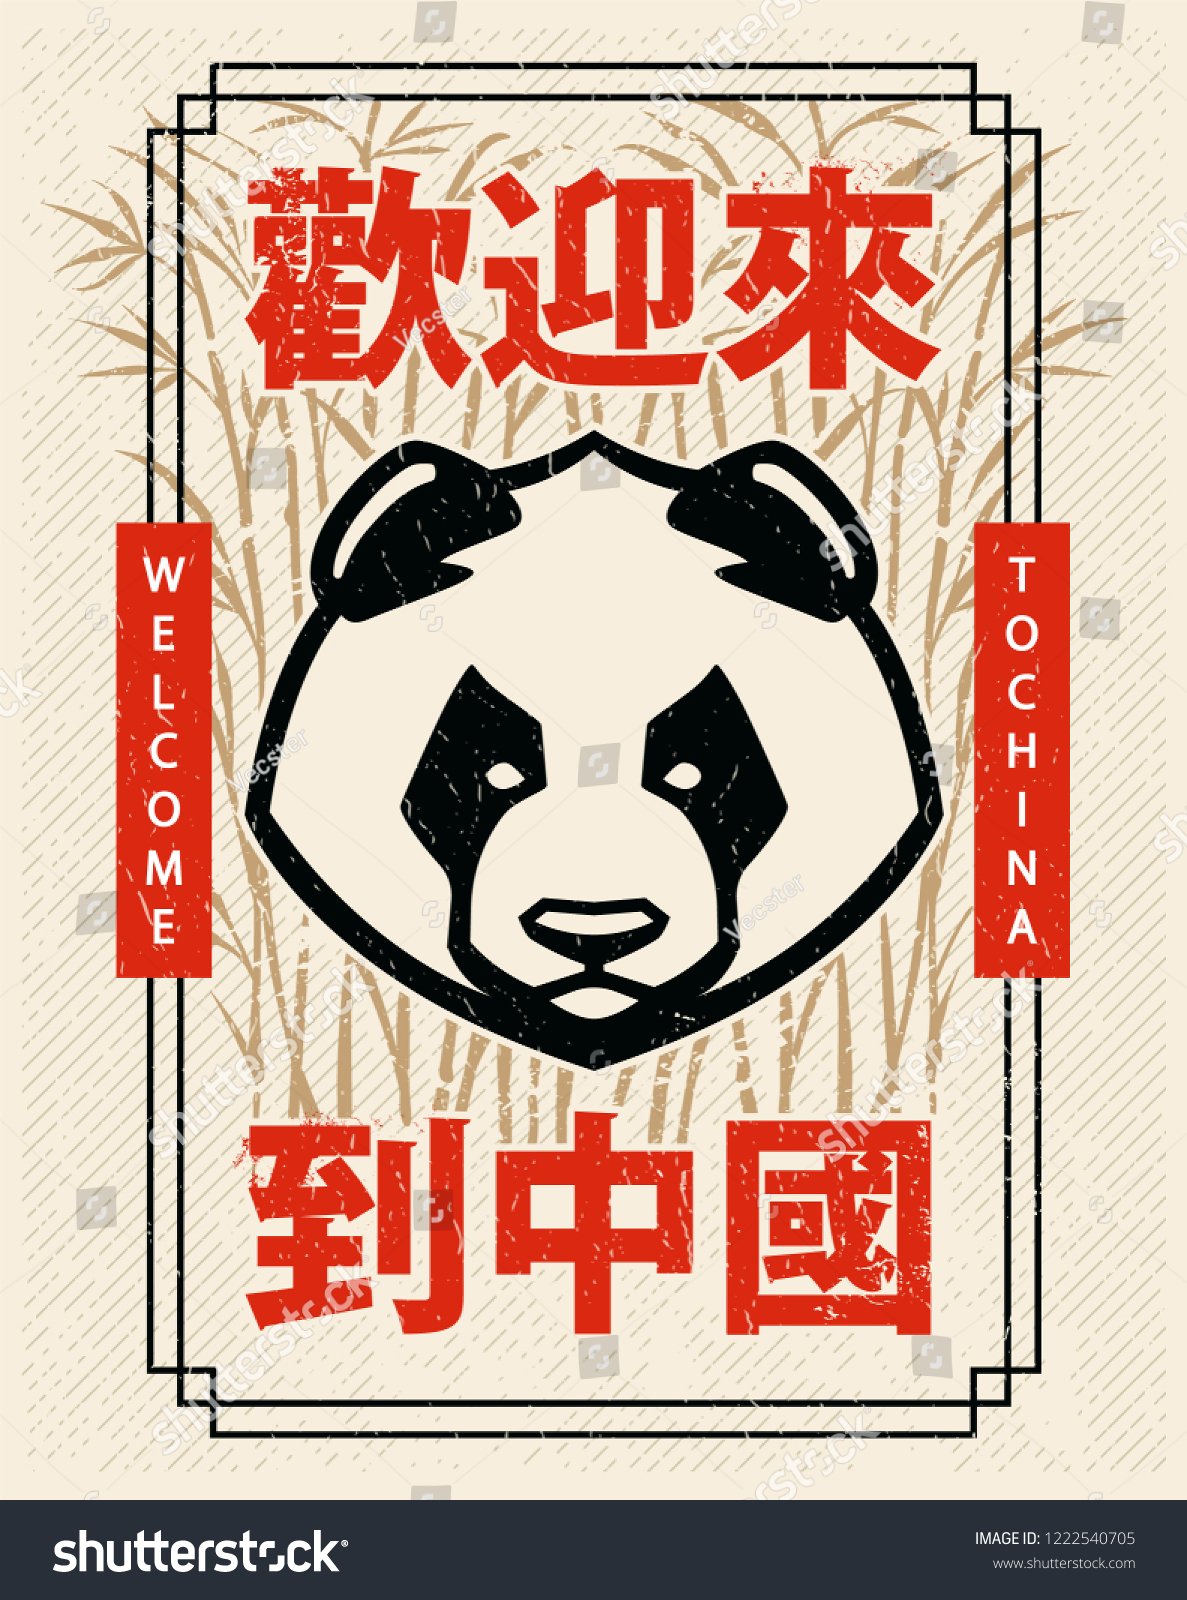 SVG of Panda mascot emblem design with typography: Welcome to China. Chinese poster with panda bear, frame and bamboo. Vector illustration. svg